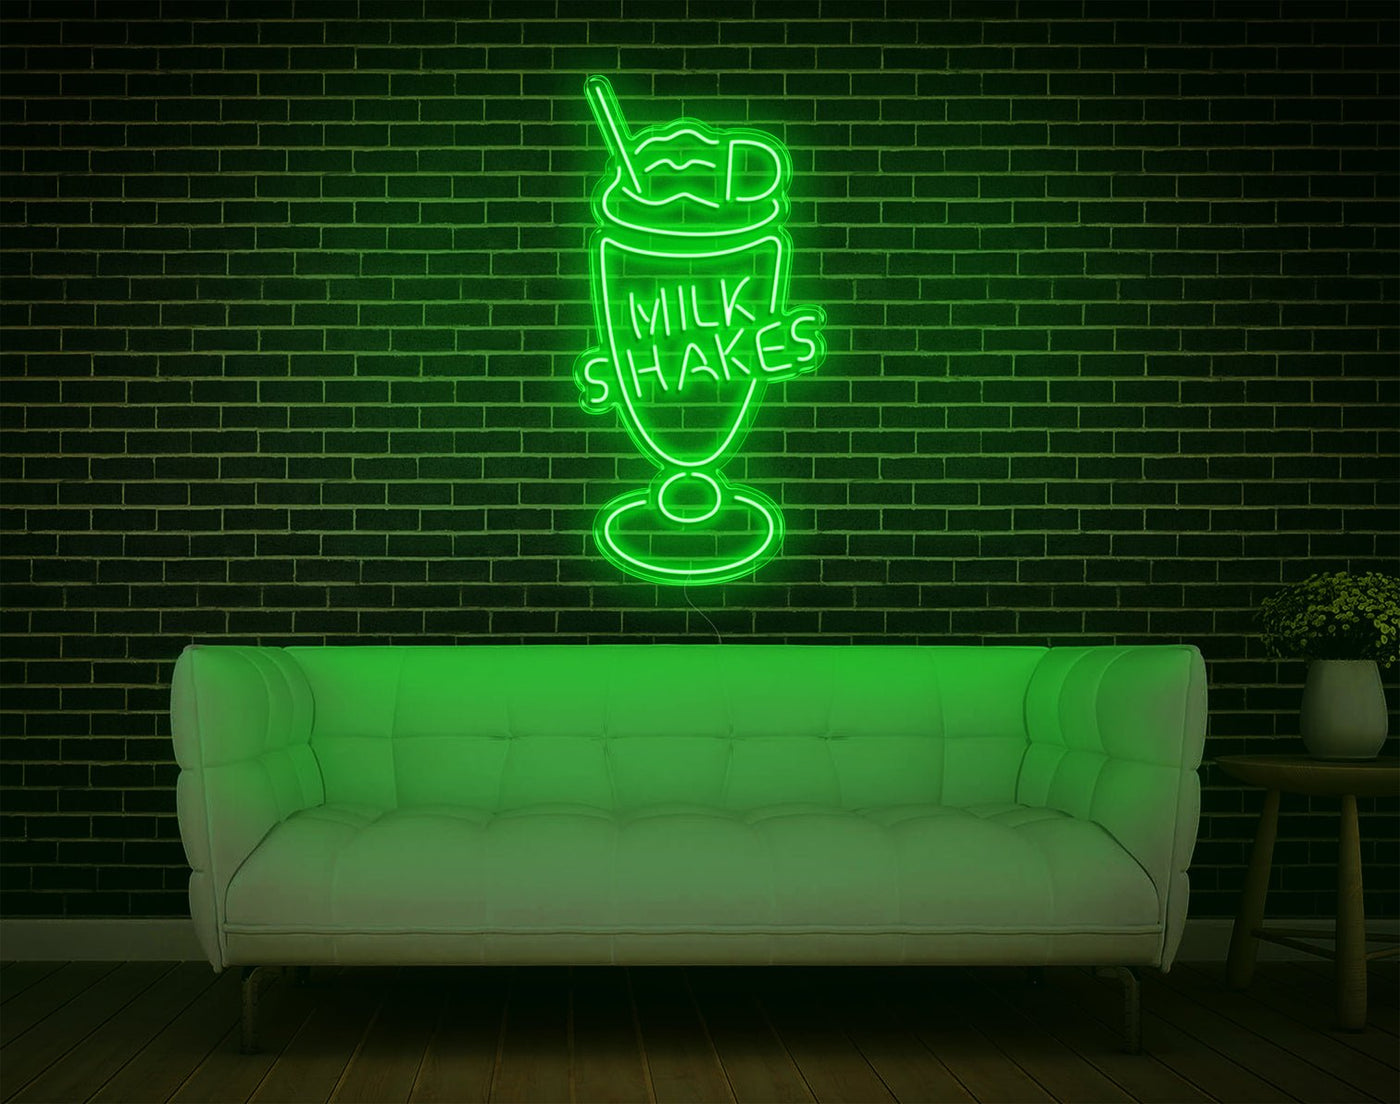 Milk Shakes LED Neon Sign - 37inch x 19inchGreen